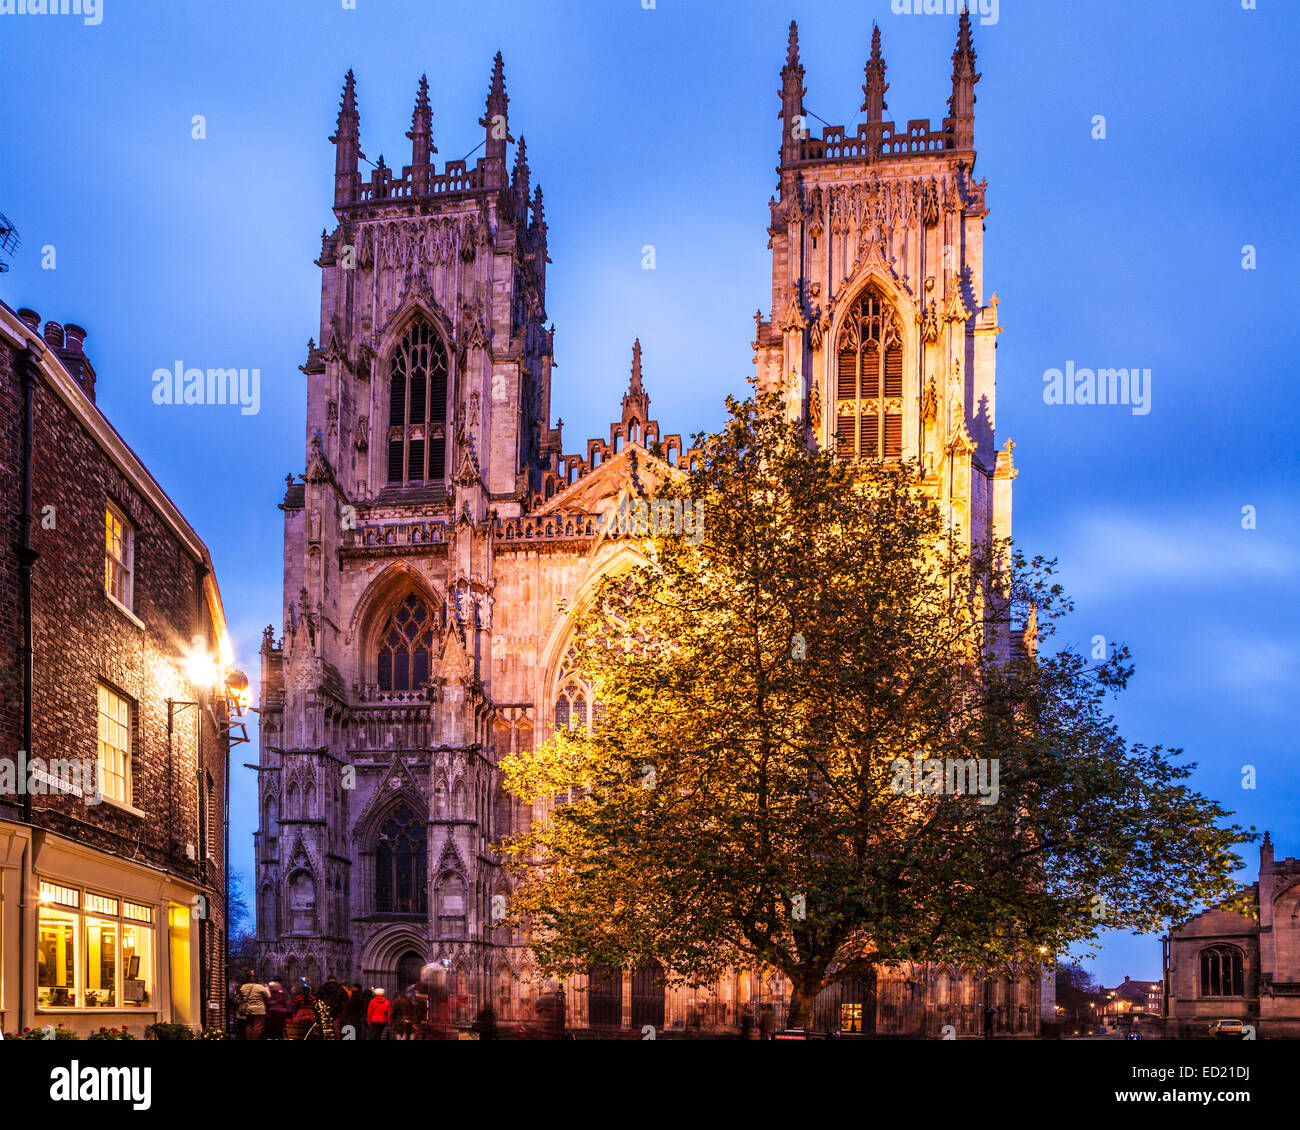 York Minster, the cathedral of the city of York, floodlit at twilight. Stock Photo